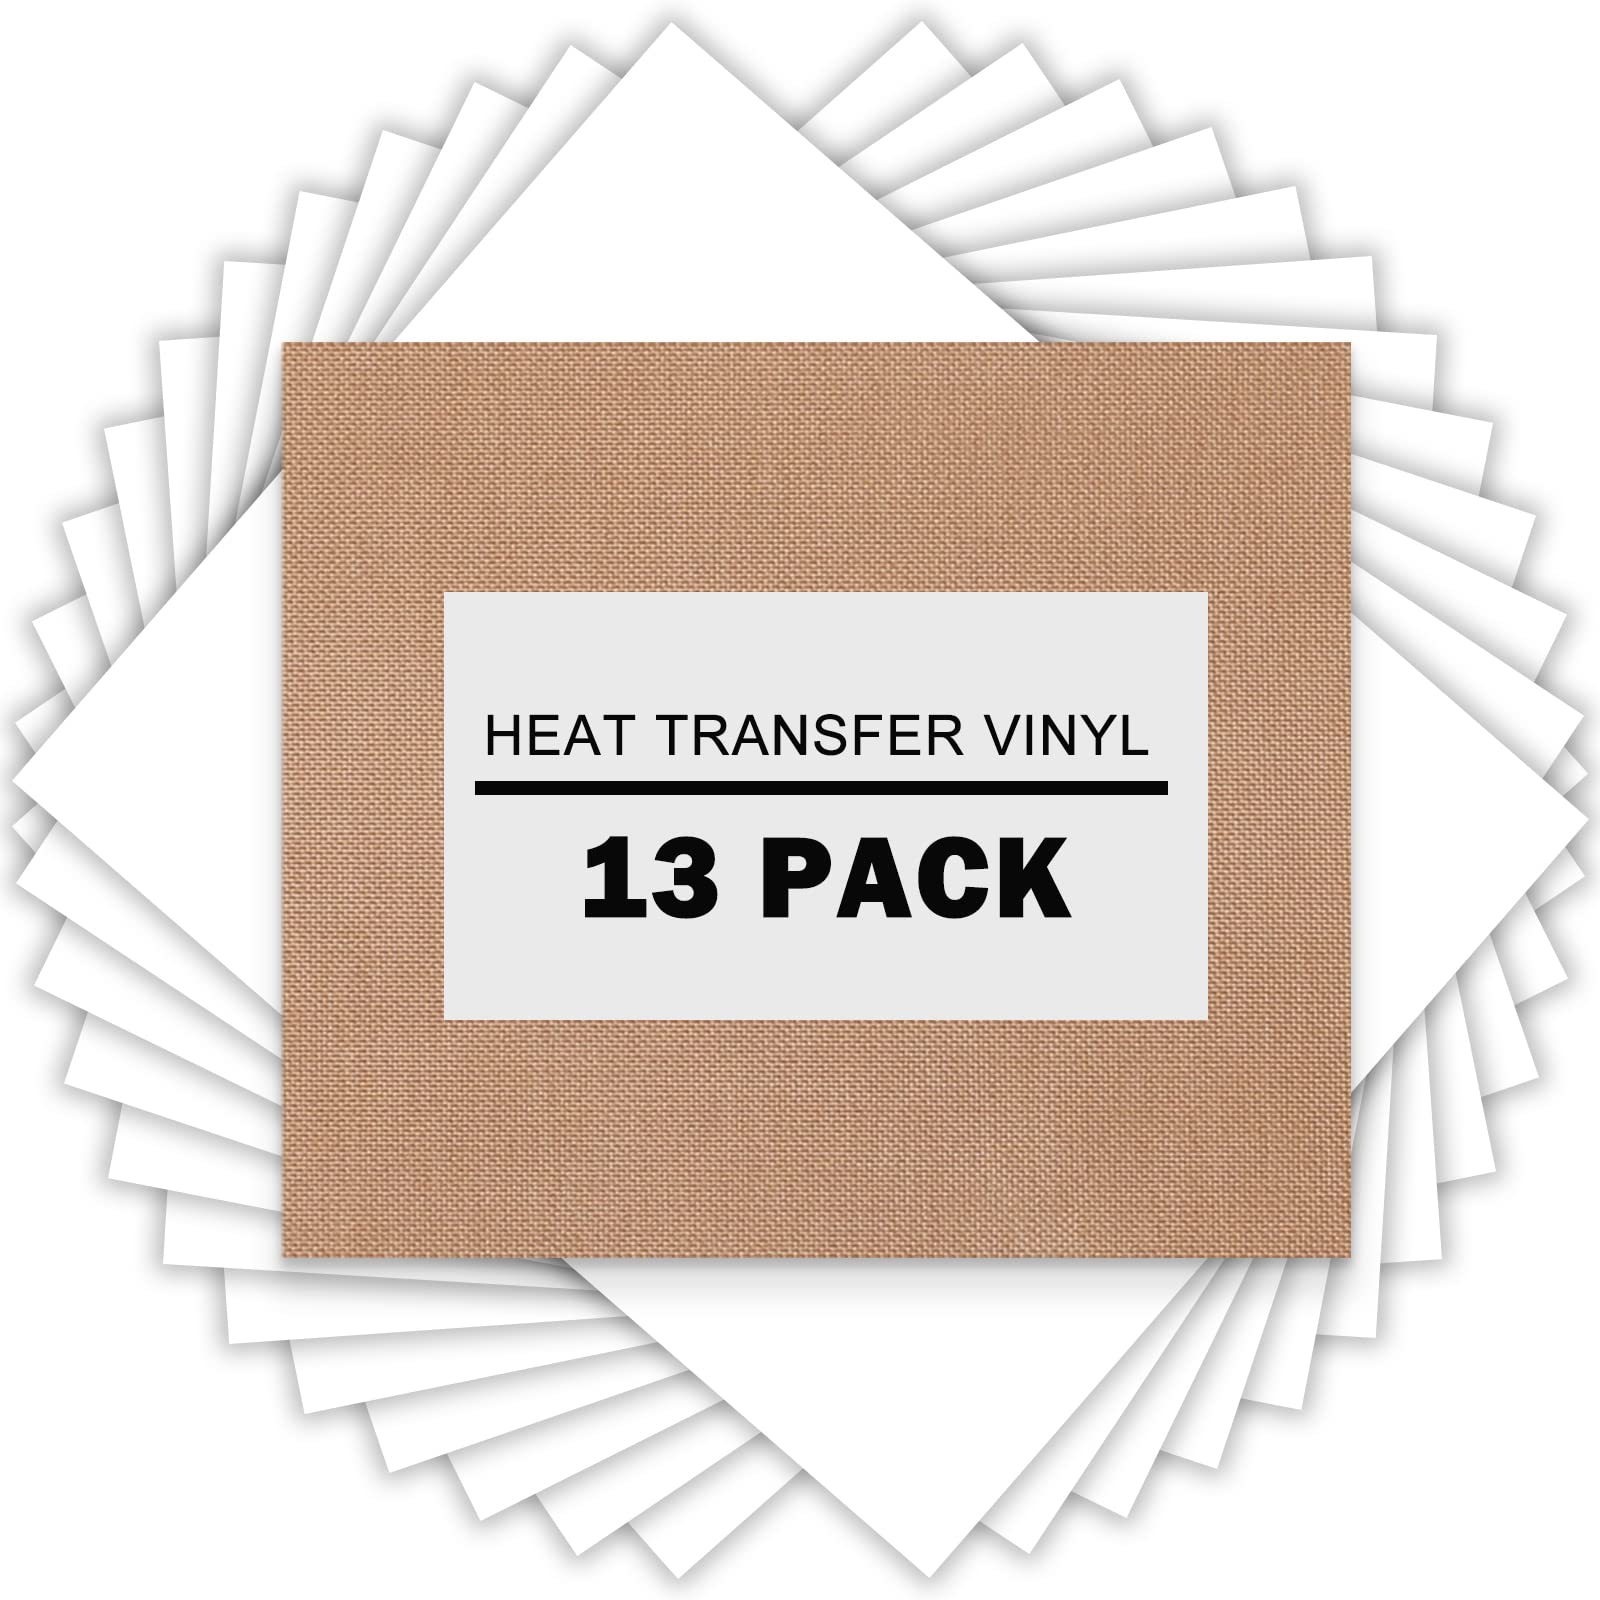 XSEINO HTV Heat Transfer Vinyl Sheets:13Pack 12 x 10 White Iron on Vinyl  for T-Shirt,Heat Transfer Vinyl for Cricut,Silhouette Cameo or Heat Press  Machine(Total 12X10FT) 13 PACK White-A